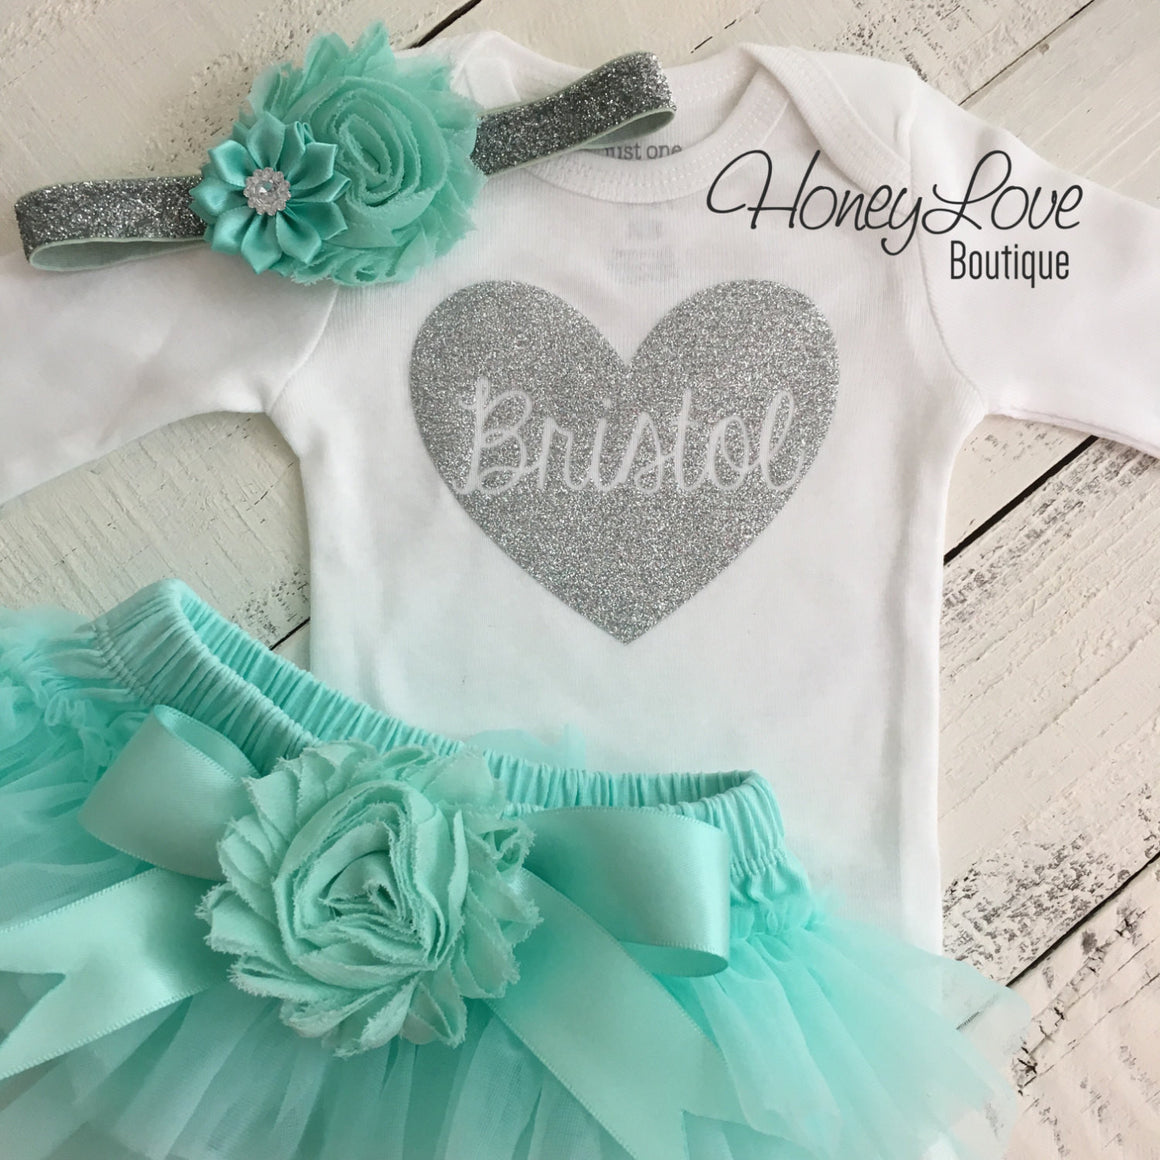 PERSONALIZED Name inside Heart - Silver Glitter and Mint/Aqua - Embellished tutu skirt bloomers - HoneyLoveBoutique